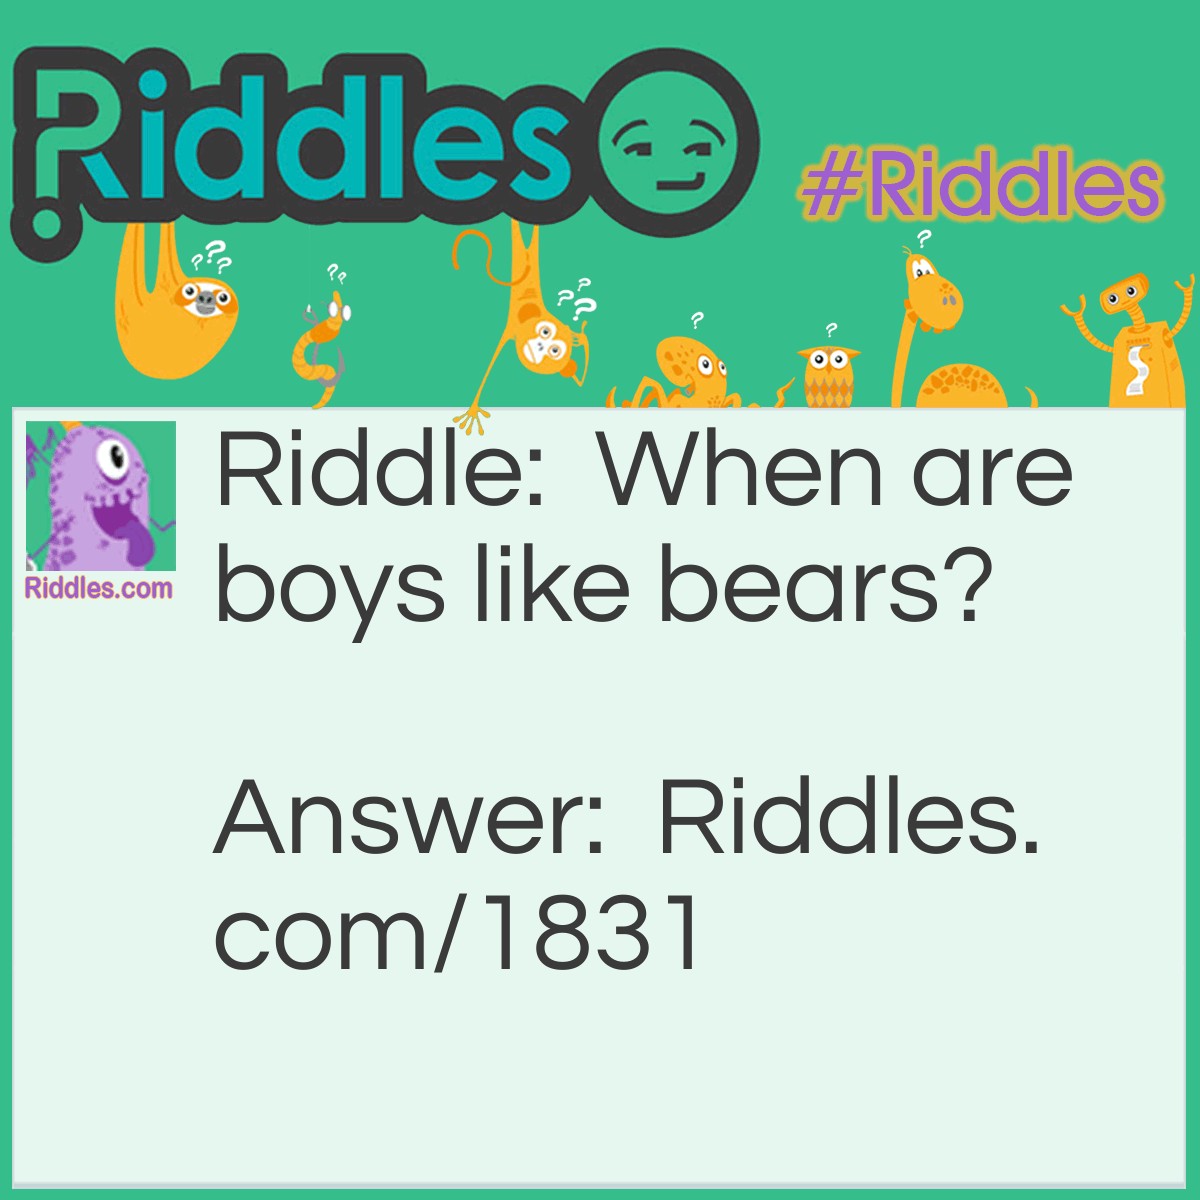 Riddle: When are boys like bears? Answer: When they're bare-footed.